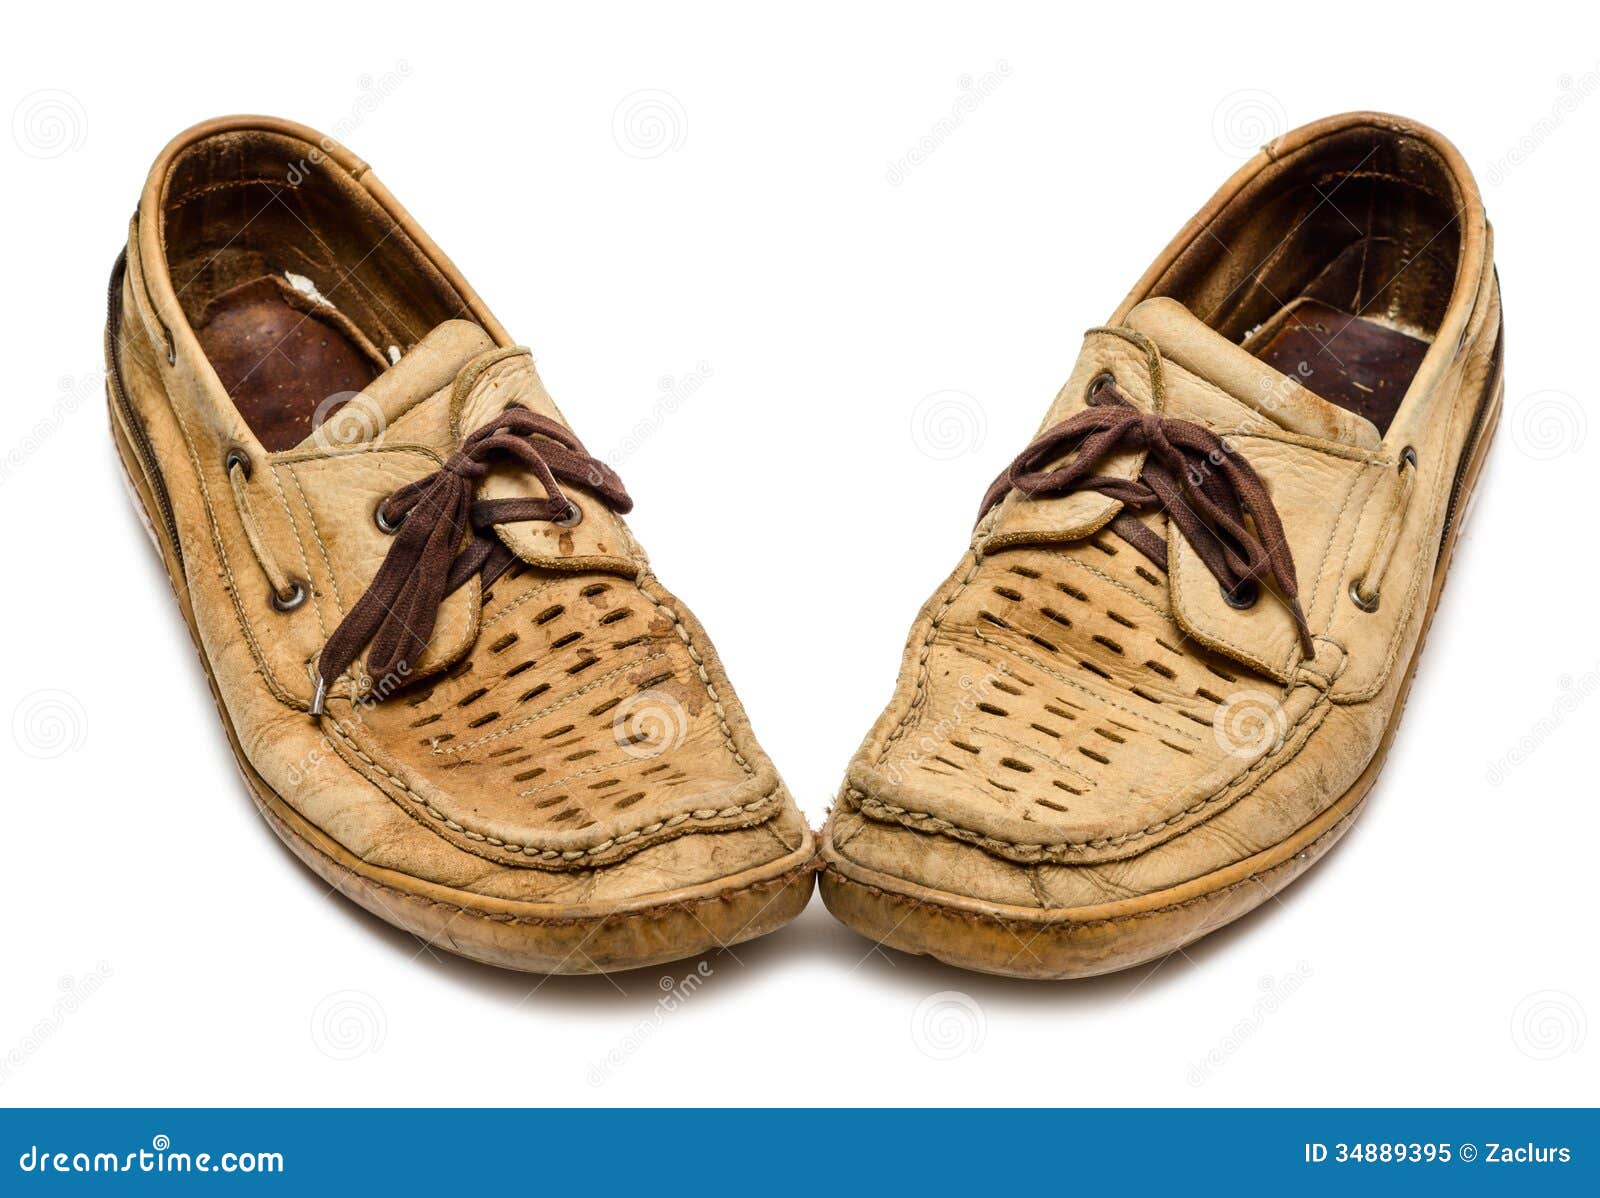 Pair of old moccasins stock image. Image of backgrounds - 34889395